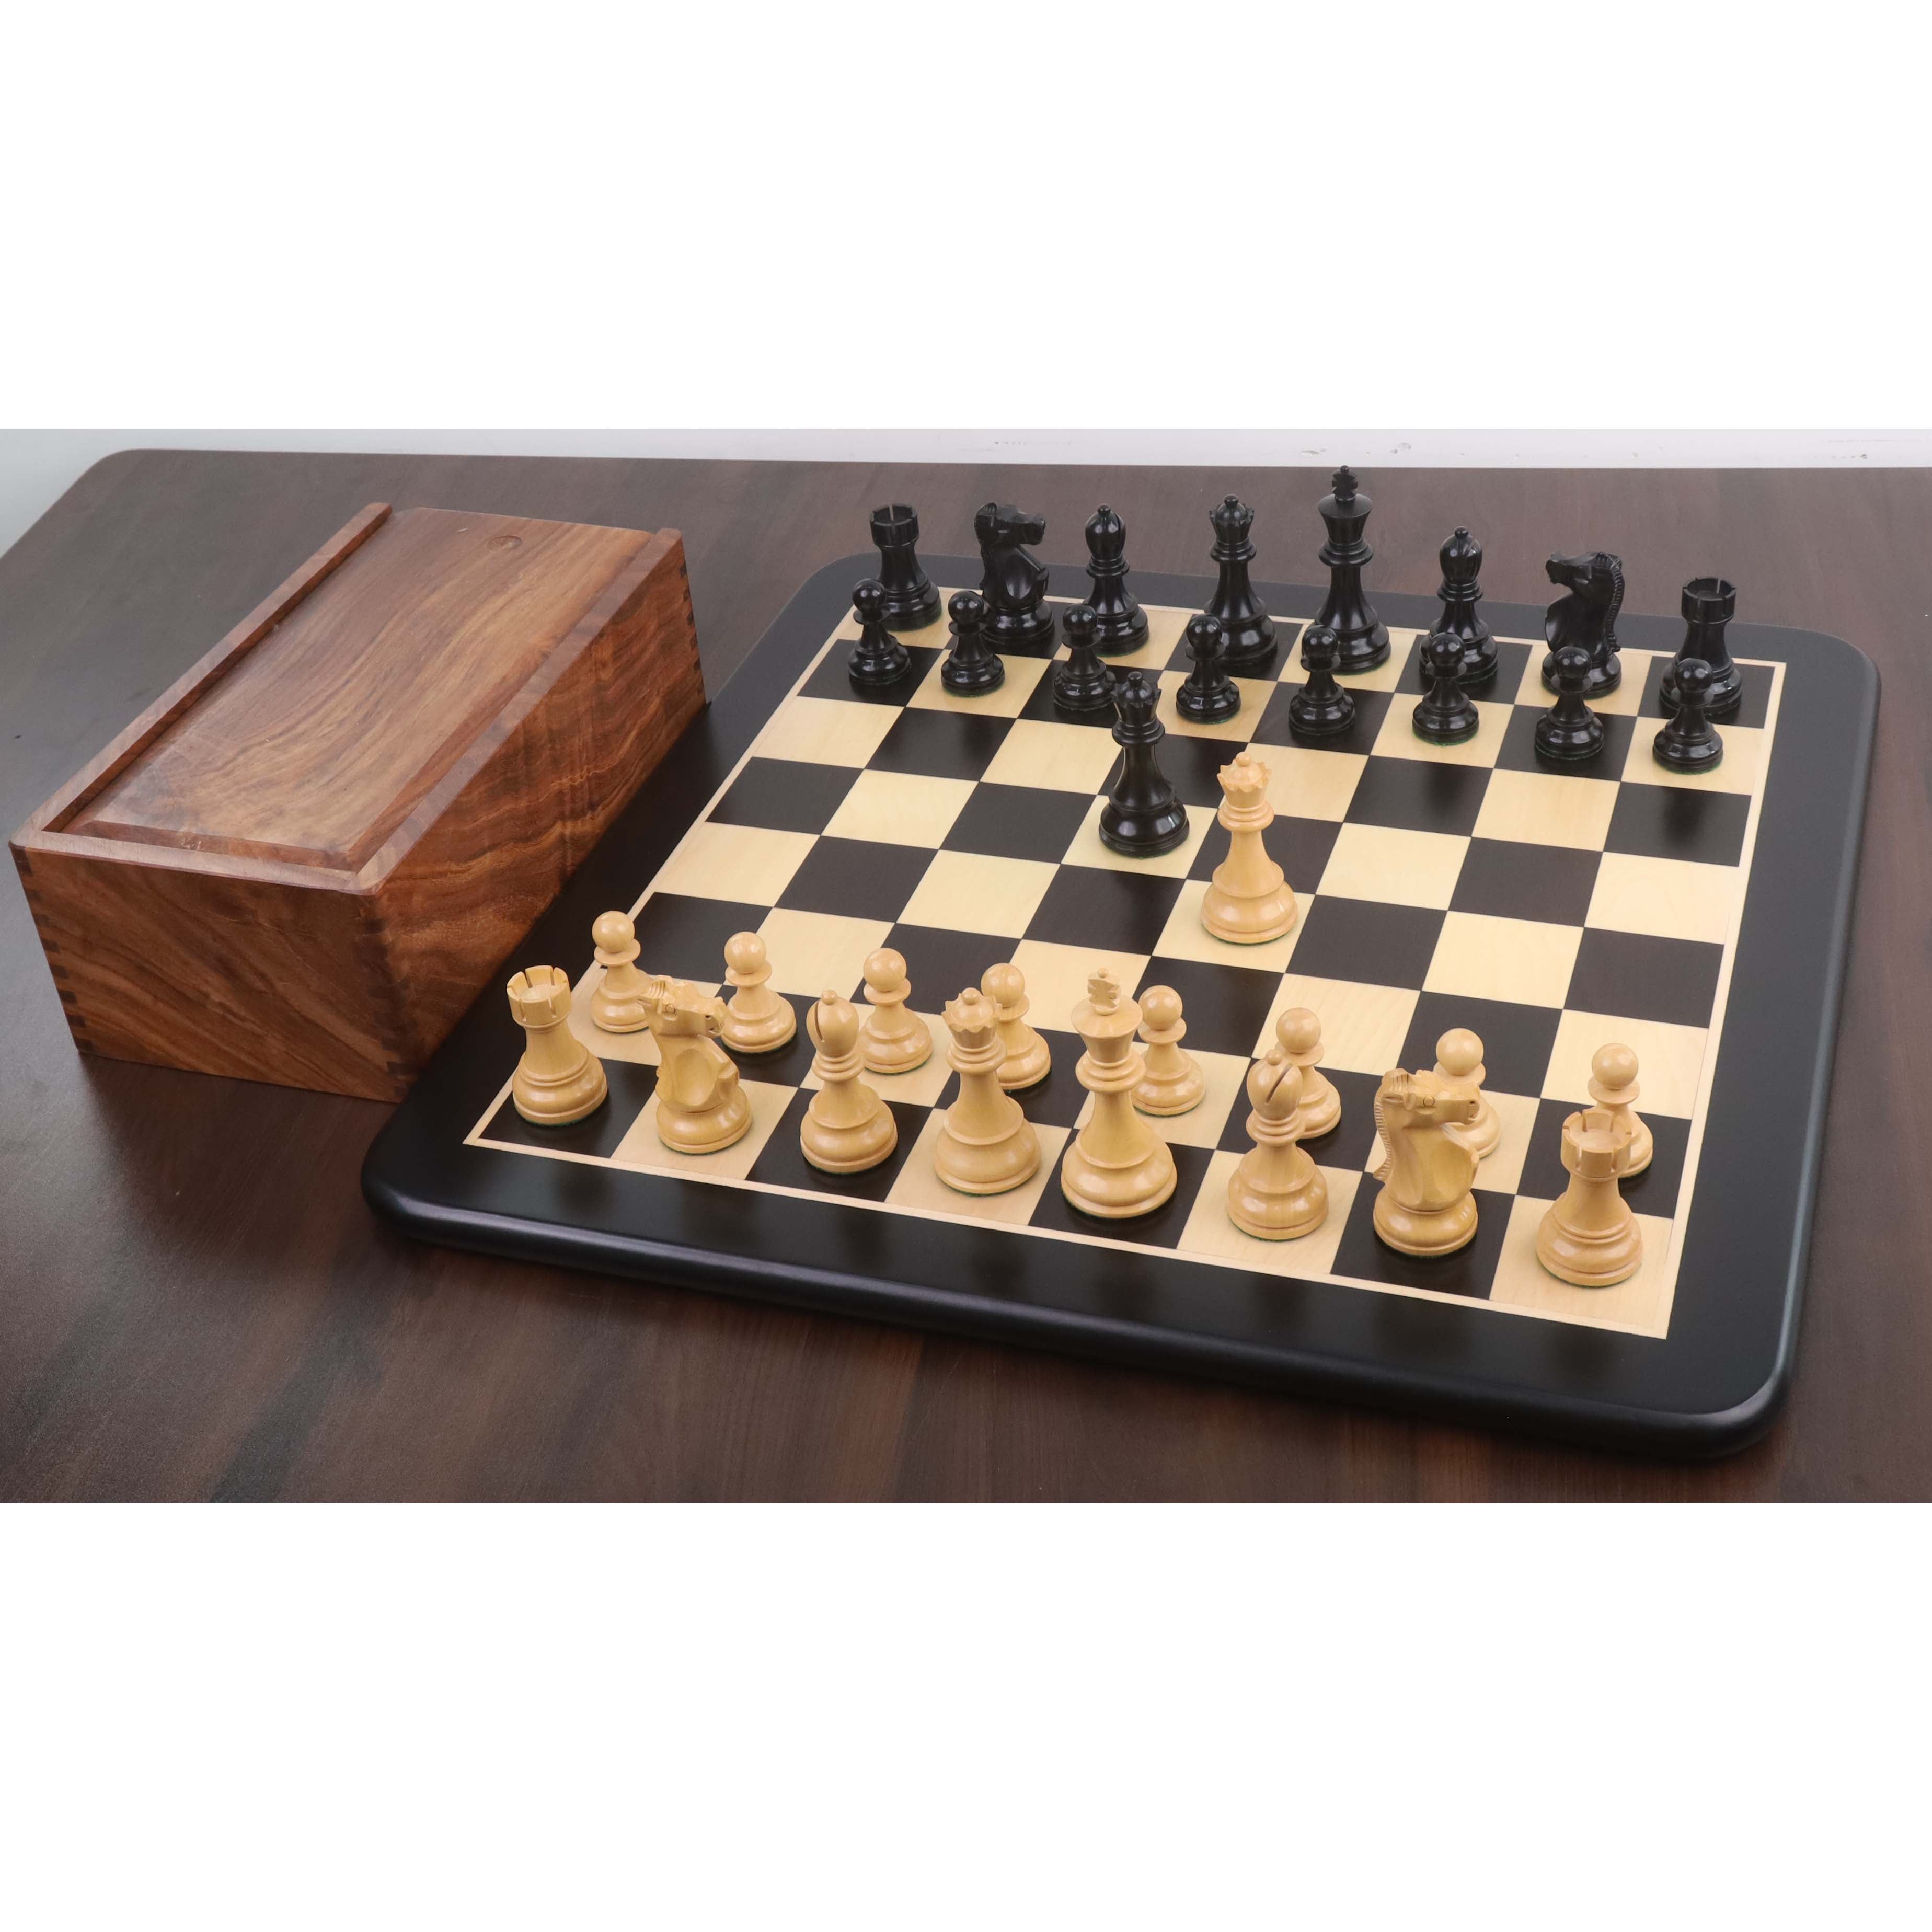 Fischer-Spassky 1972 World Chess Championship Chess Board, Table, Pieces to  be Auctioned this Thursday in Copenhagen ~ Chess Magazine Black and White